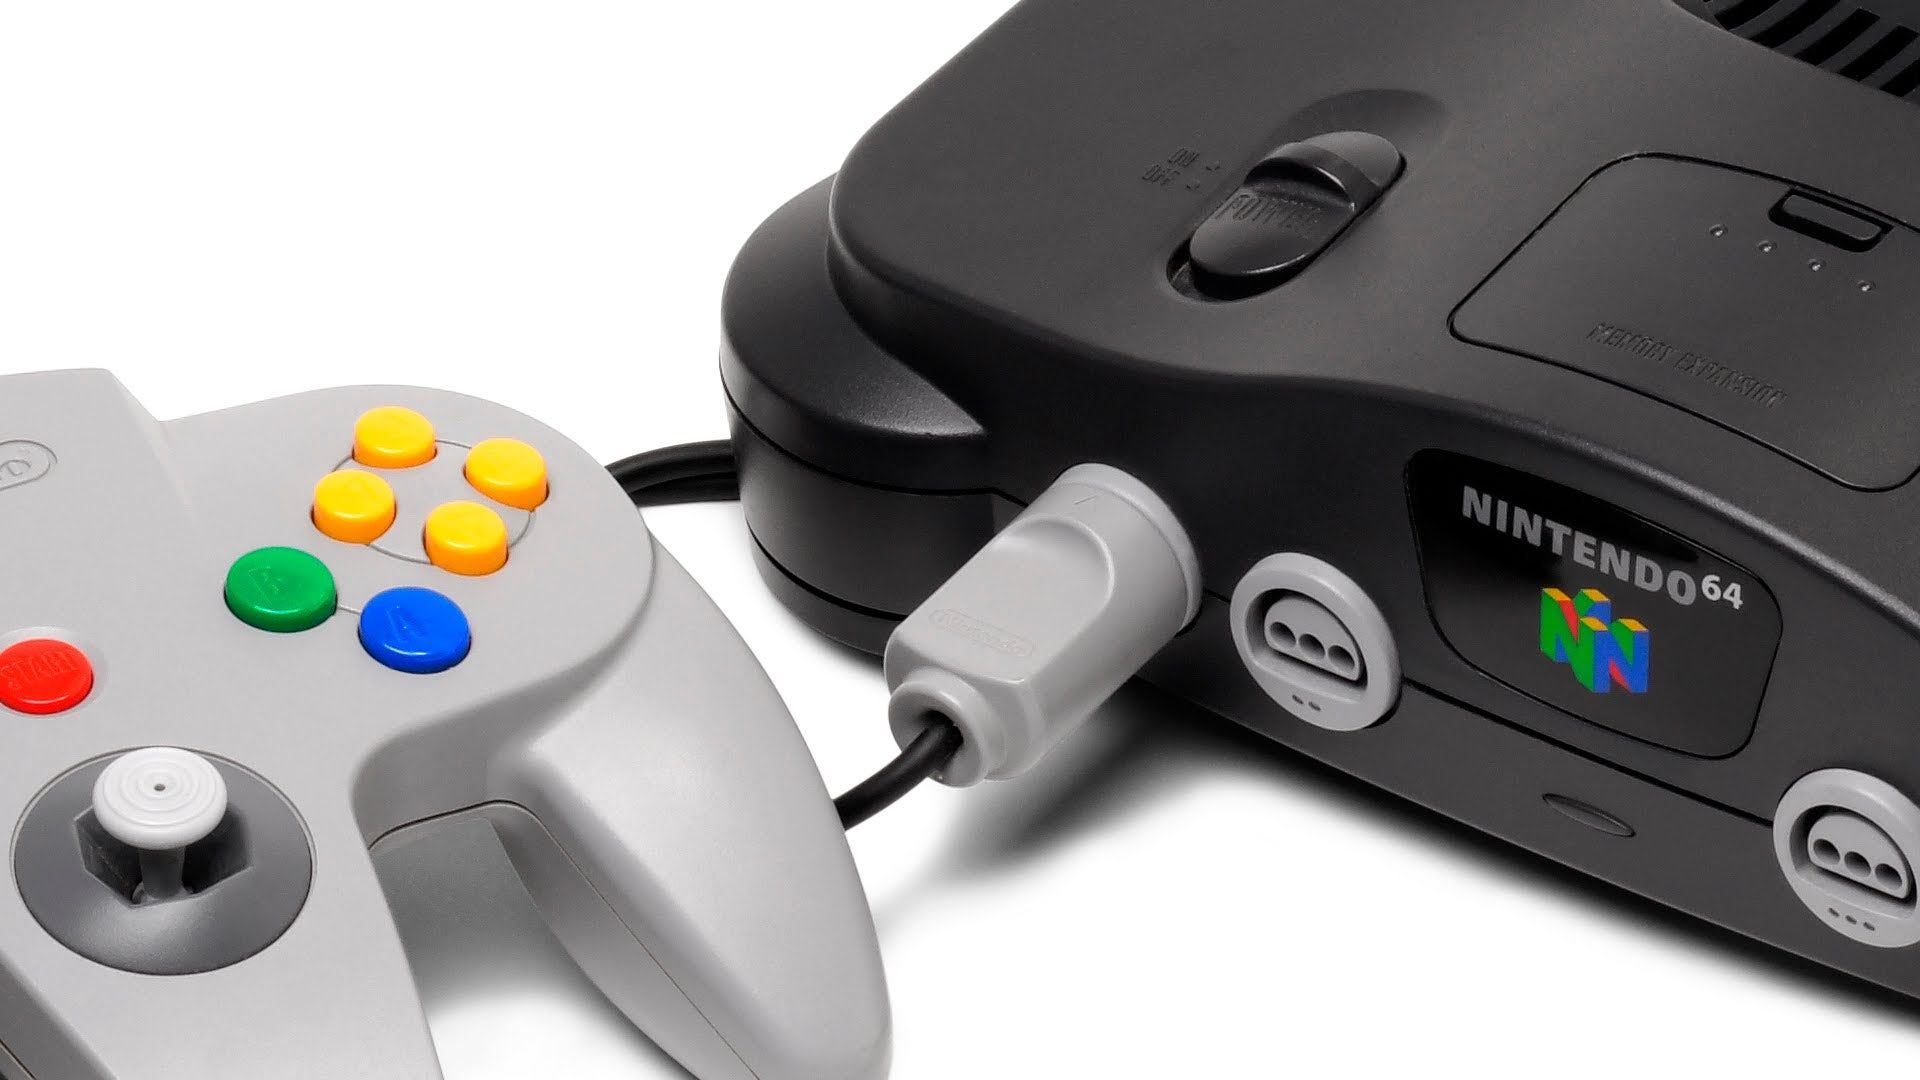 N64 Classic Mini: Hardware and games list potentially revealed in new leak